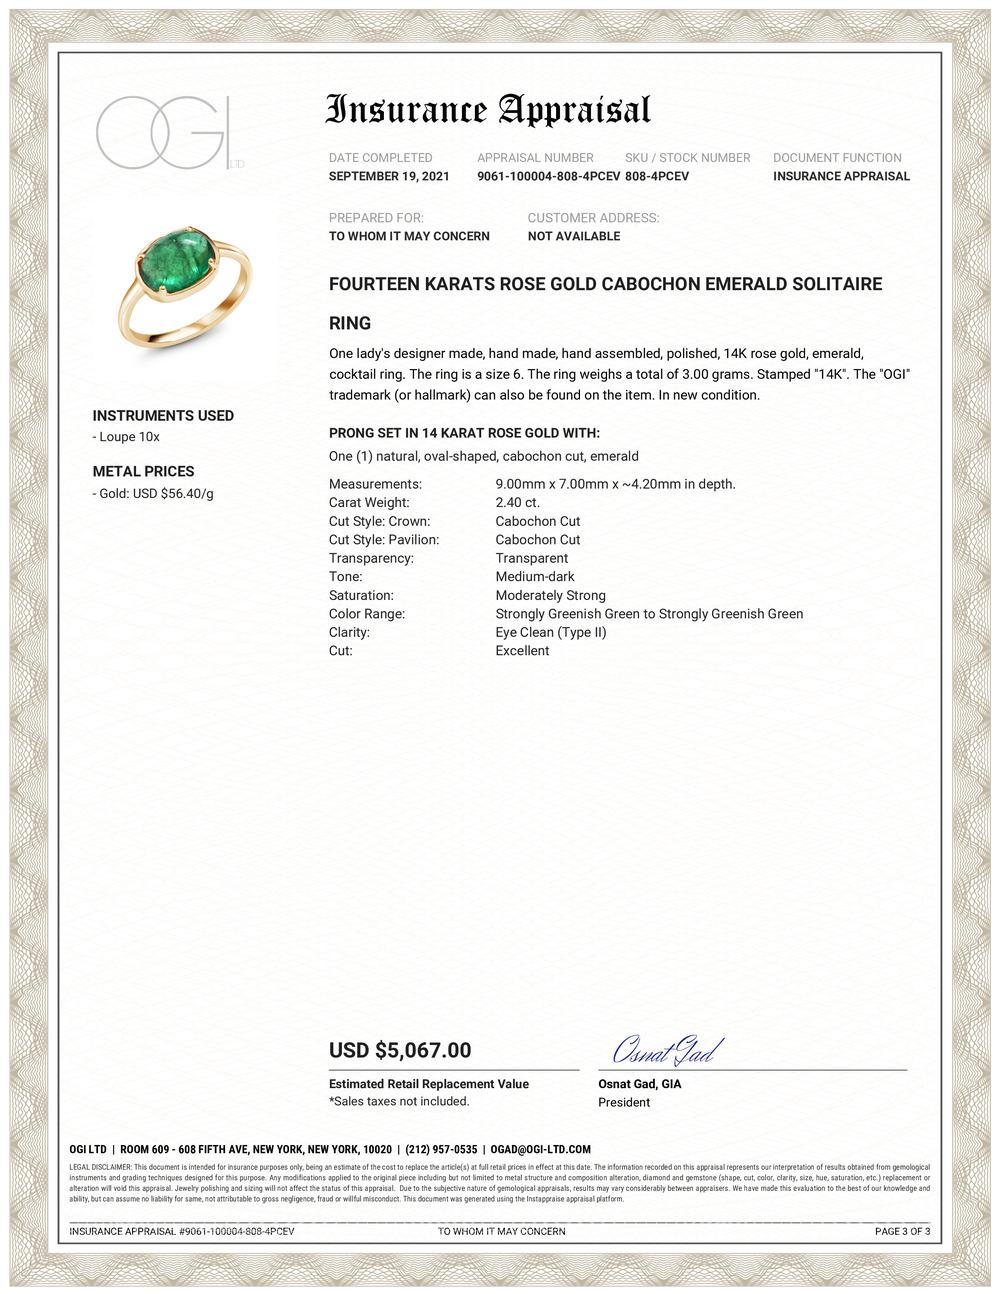 Fourteen Karats rose gold cabochon emerald ring 
Cabochon emerald weighing 2.40 carat       
Emerald hue tone color is grass green                                                     
Ring Size 6 
The ring shank is 2 millimeter 
The ring can